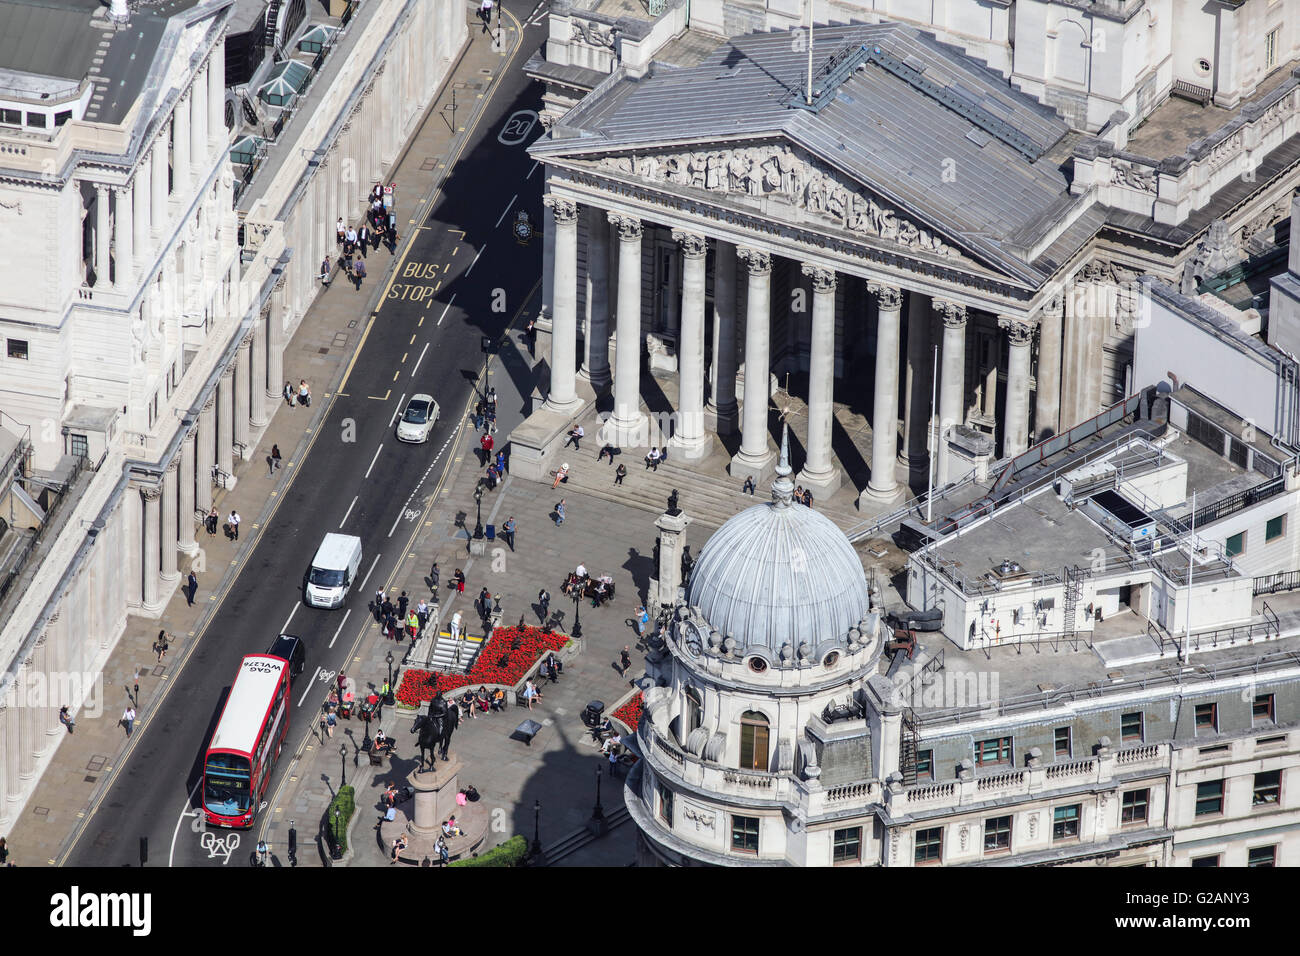 An aerial view of the Royal Exchange in London, formerly occupied by Lloyds but now a shopping venue Stock Photo